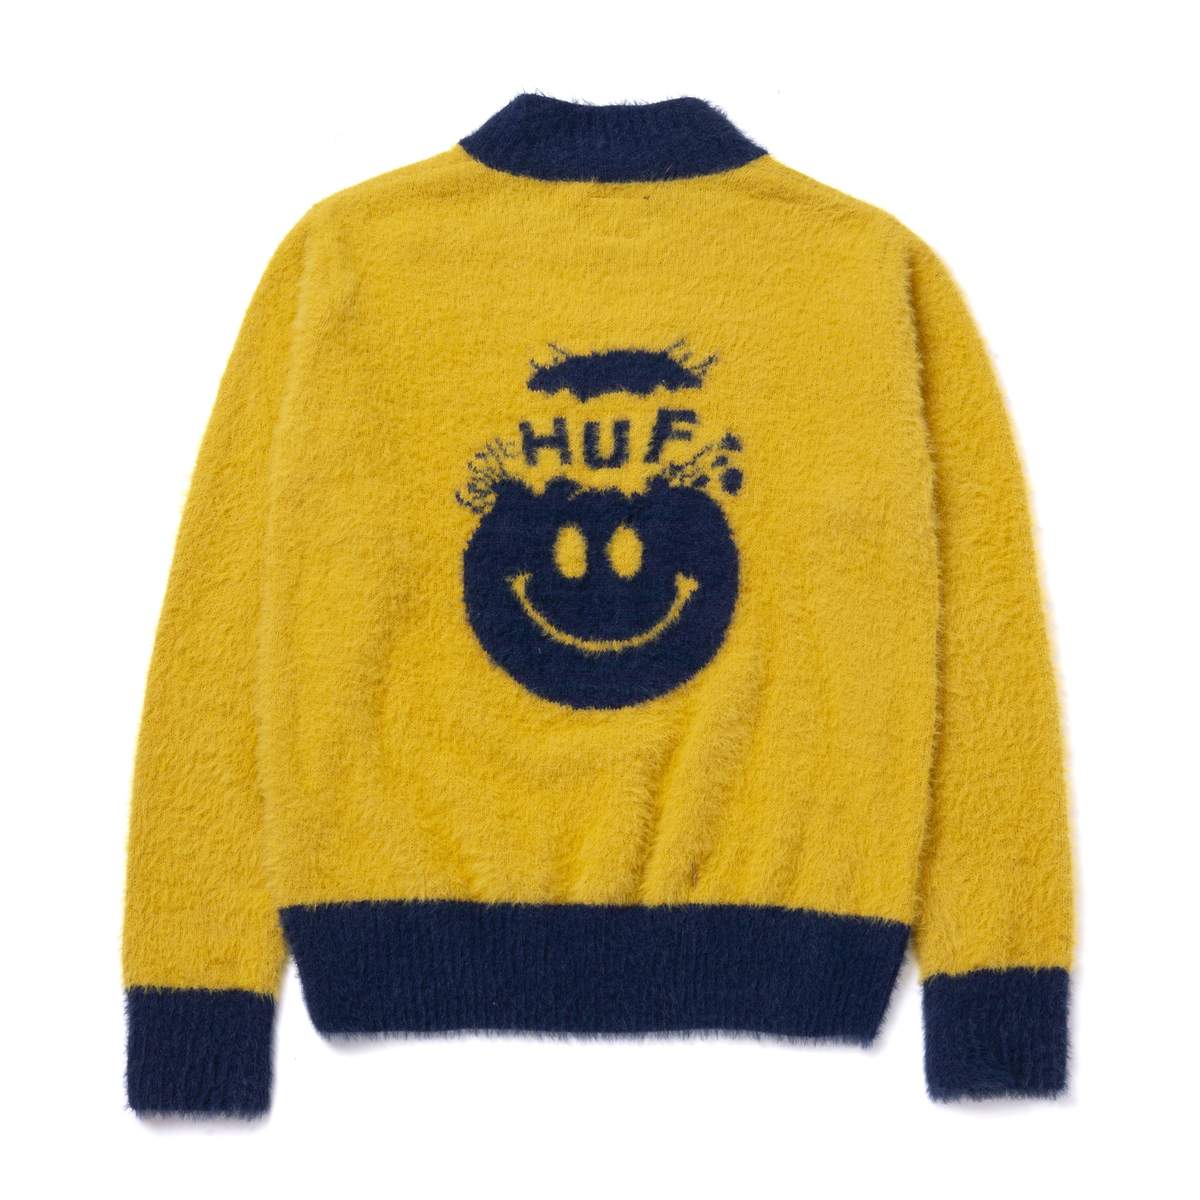 HUF W DISORDER JACQUARD KNIT SWEATER - Boutique Homies